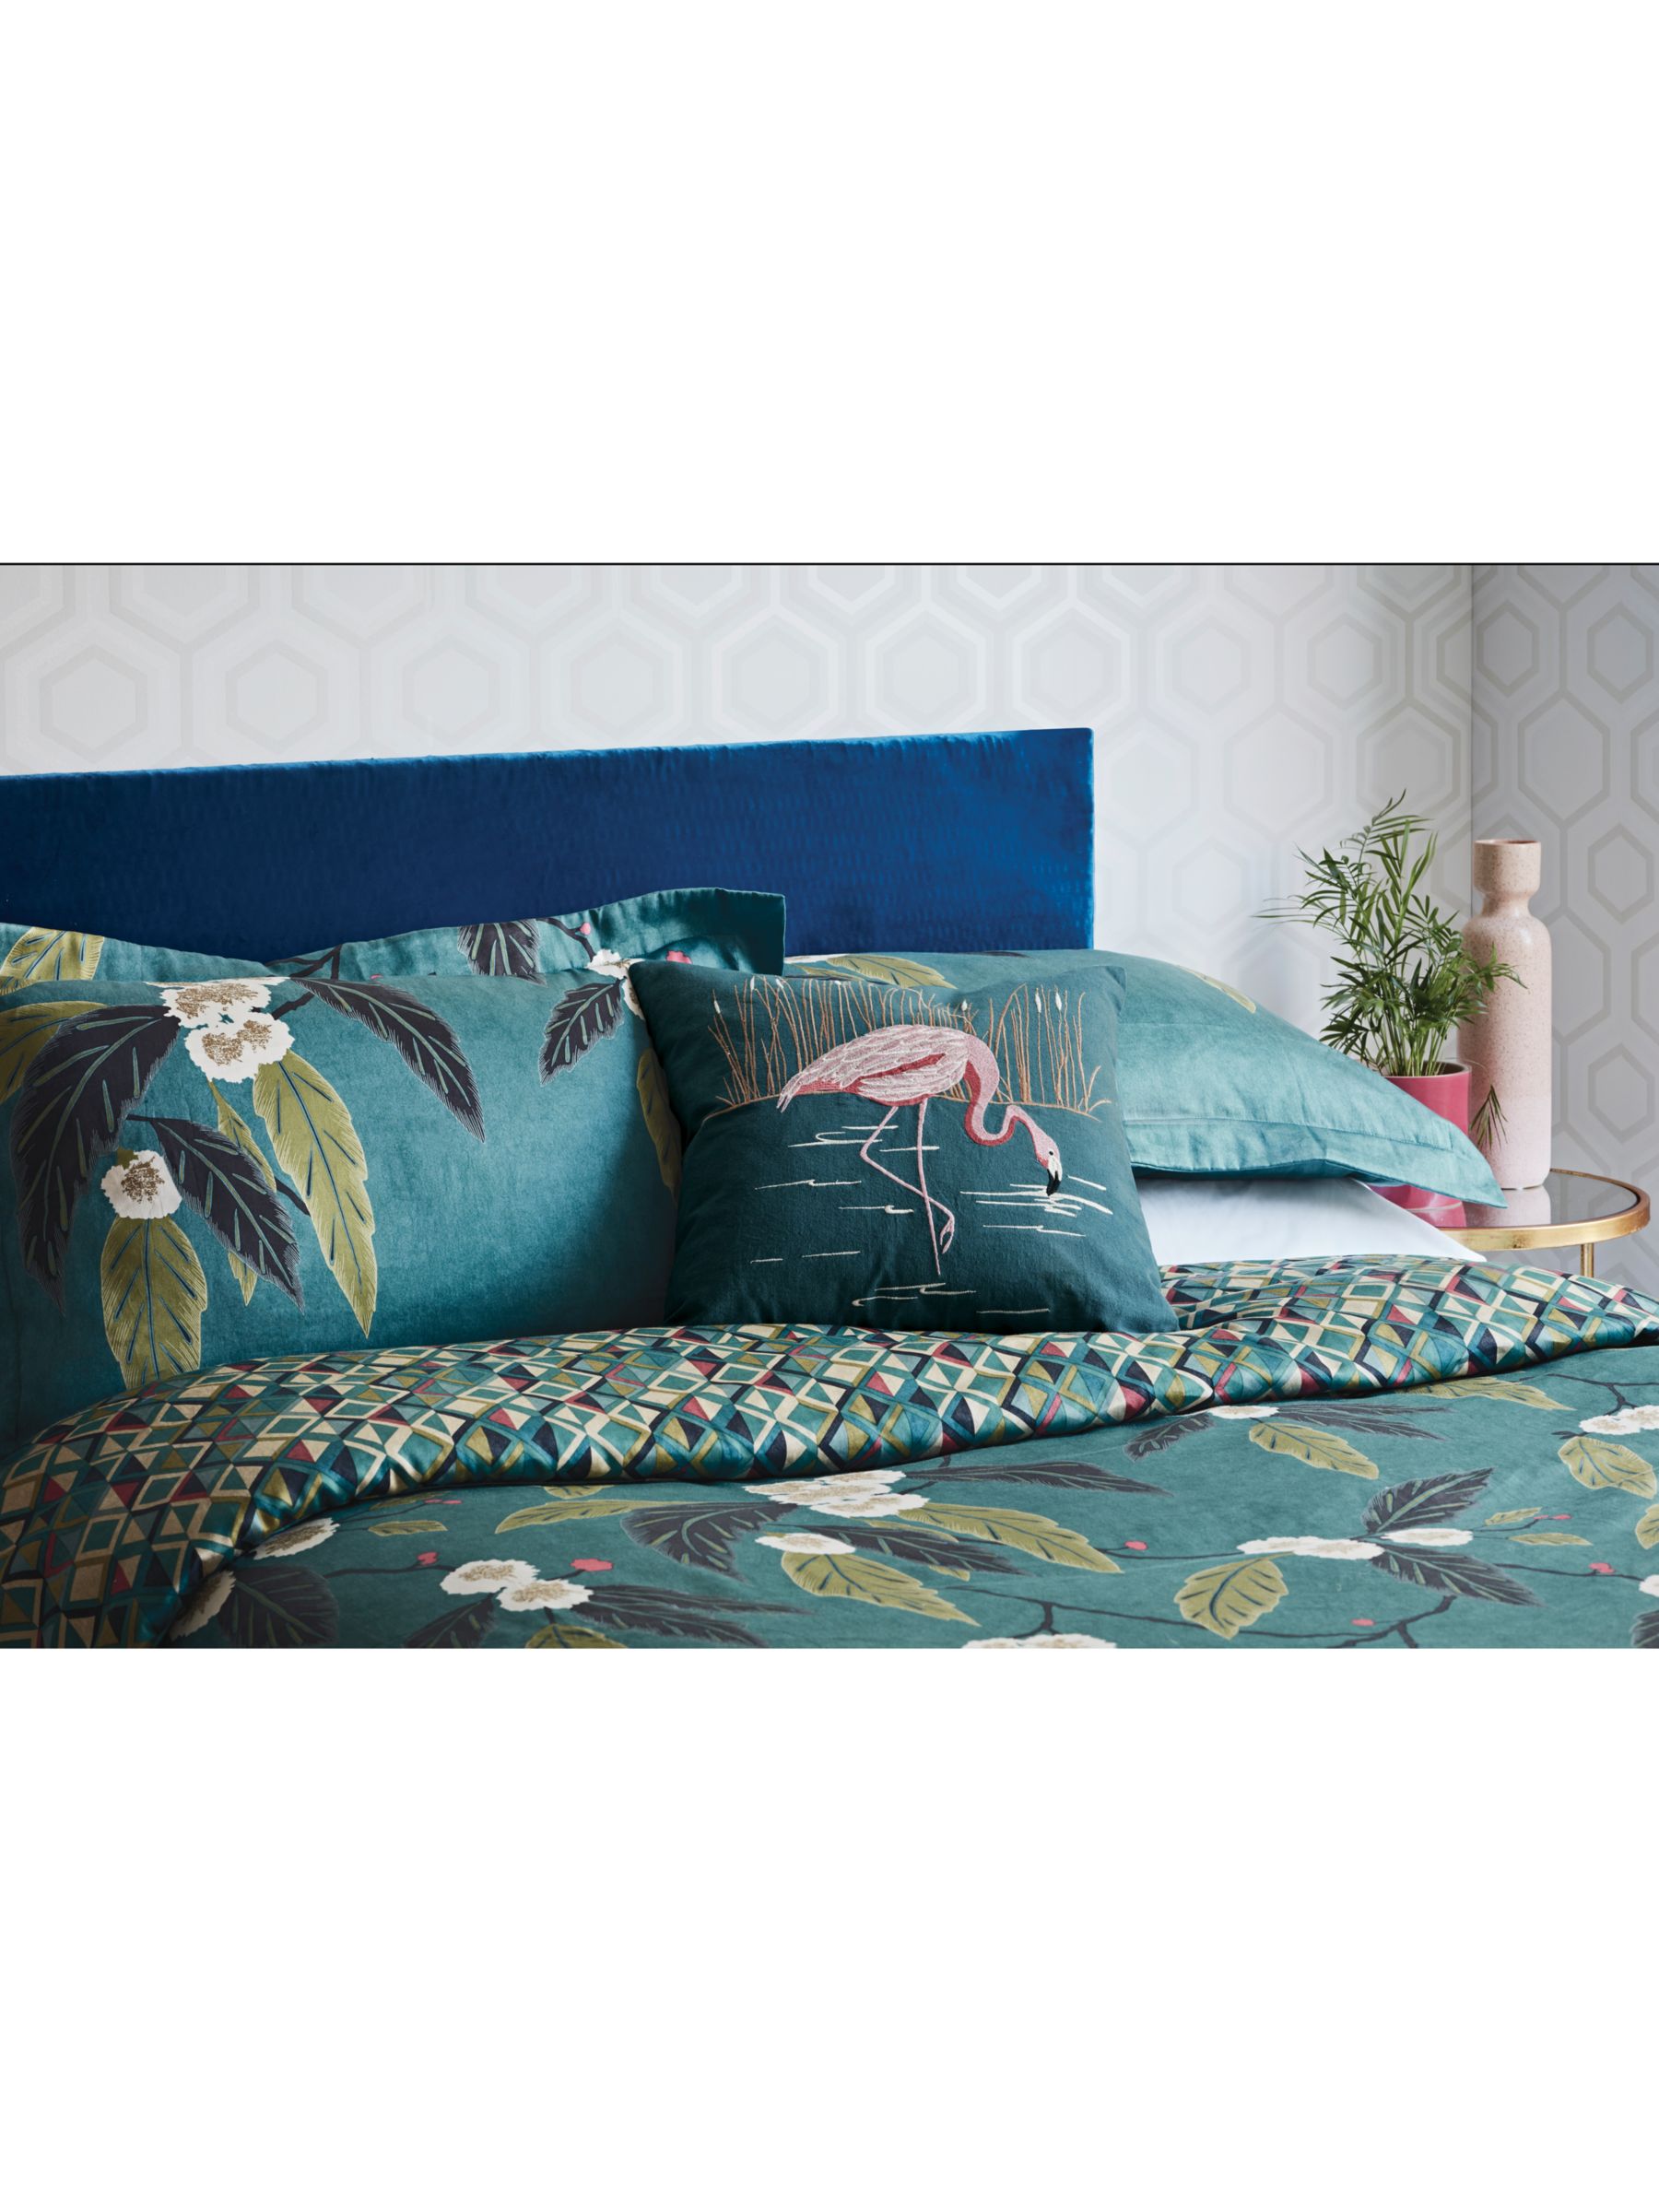 Harlequin Coppice Bedding At John Lewis Partners